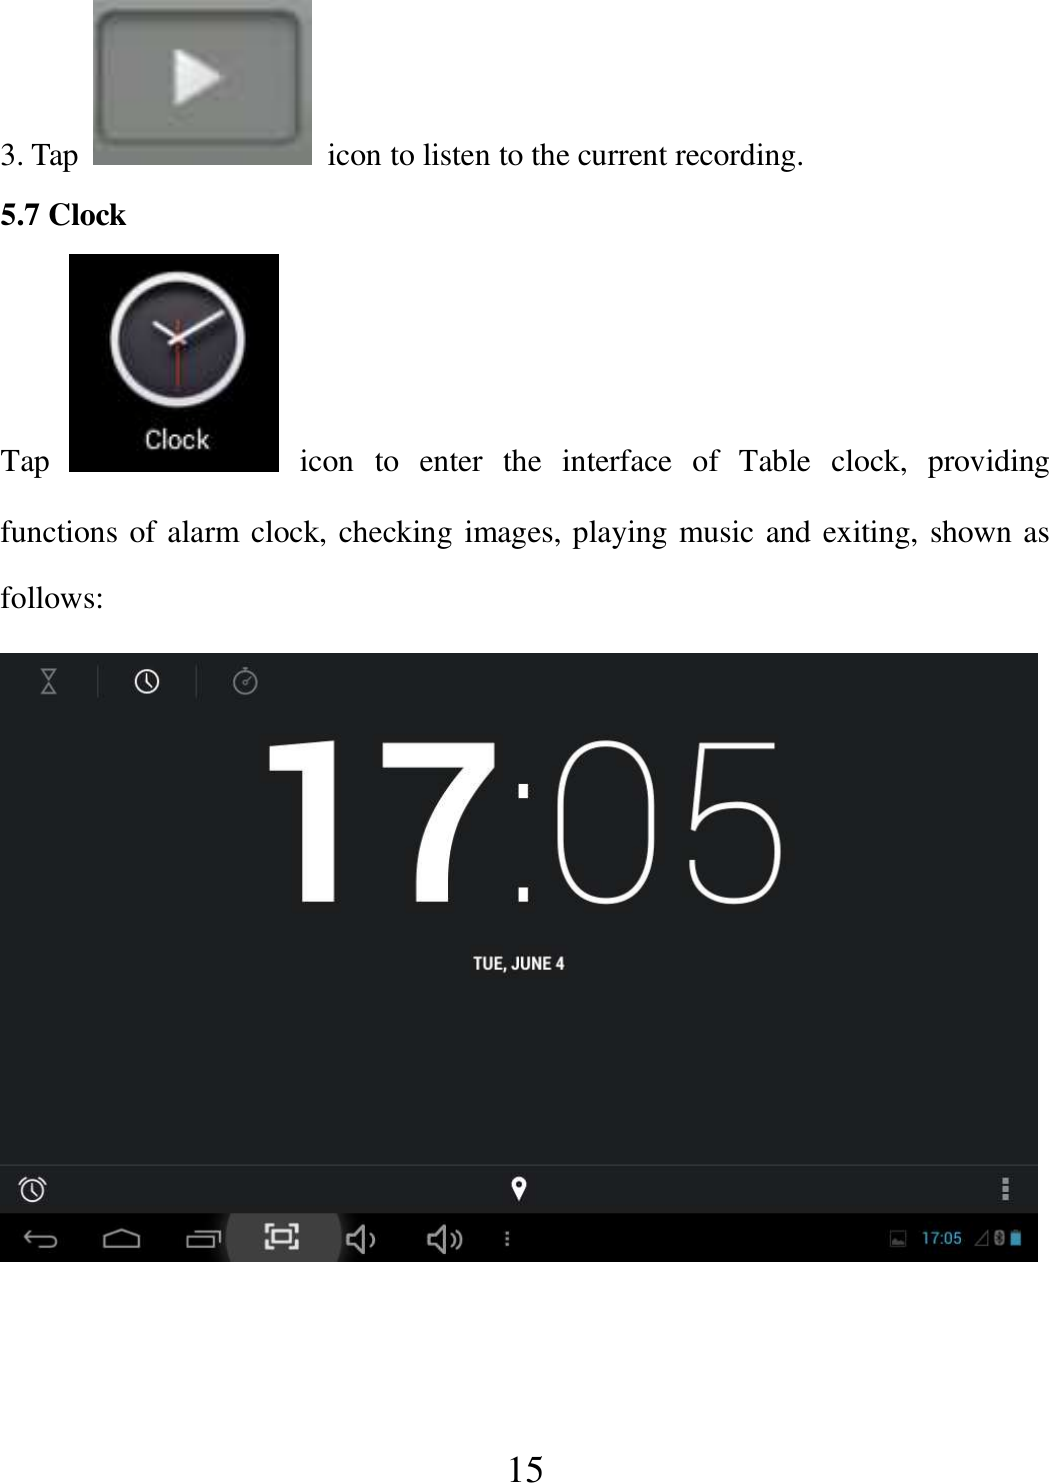   15 3. Tap    icon to listen to the current recording. 5.7 Clock Tap    icon  to  enter  the  interface  of  Table  clock,  providing functions of alarm clock, checking images, playing music and exiting, shown as follows:   